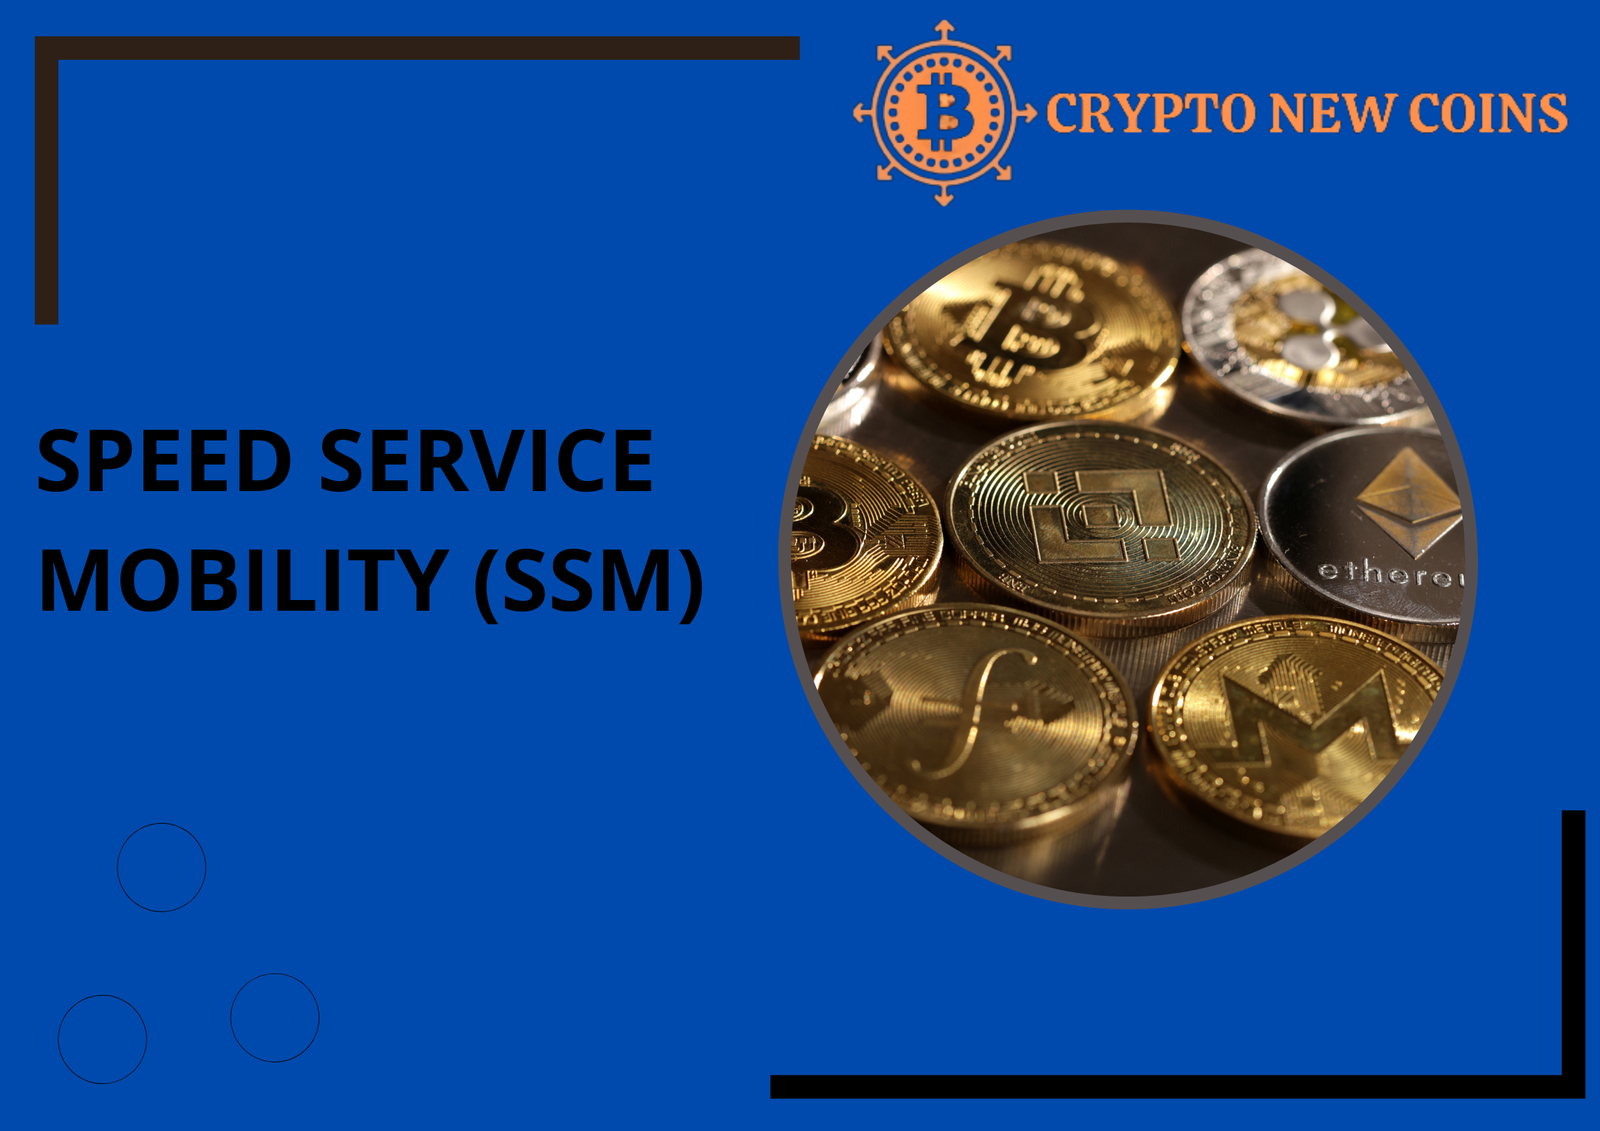 How and Where to Buy Speed Service Mobility (SSM)?